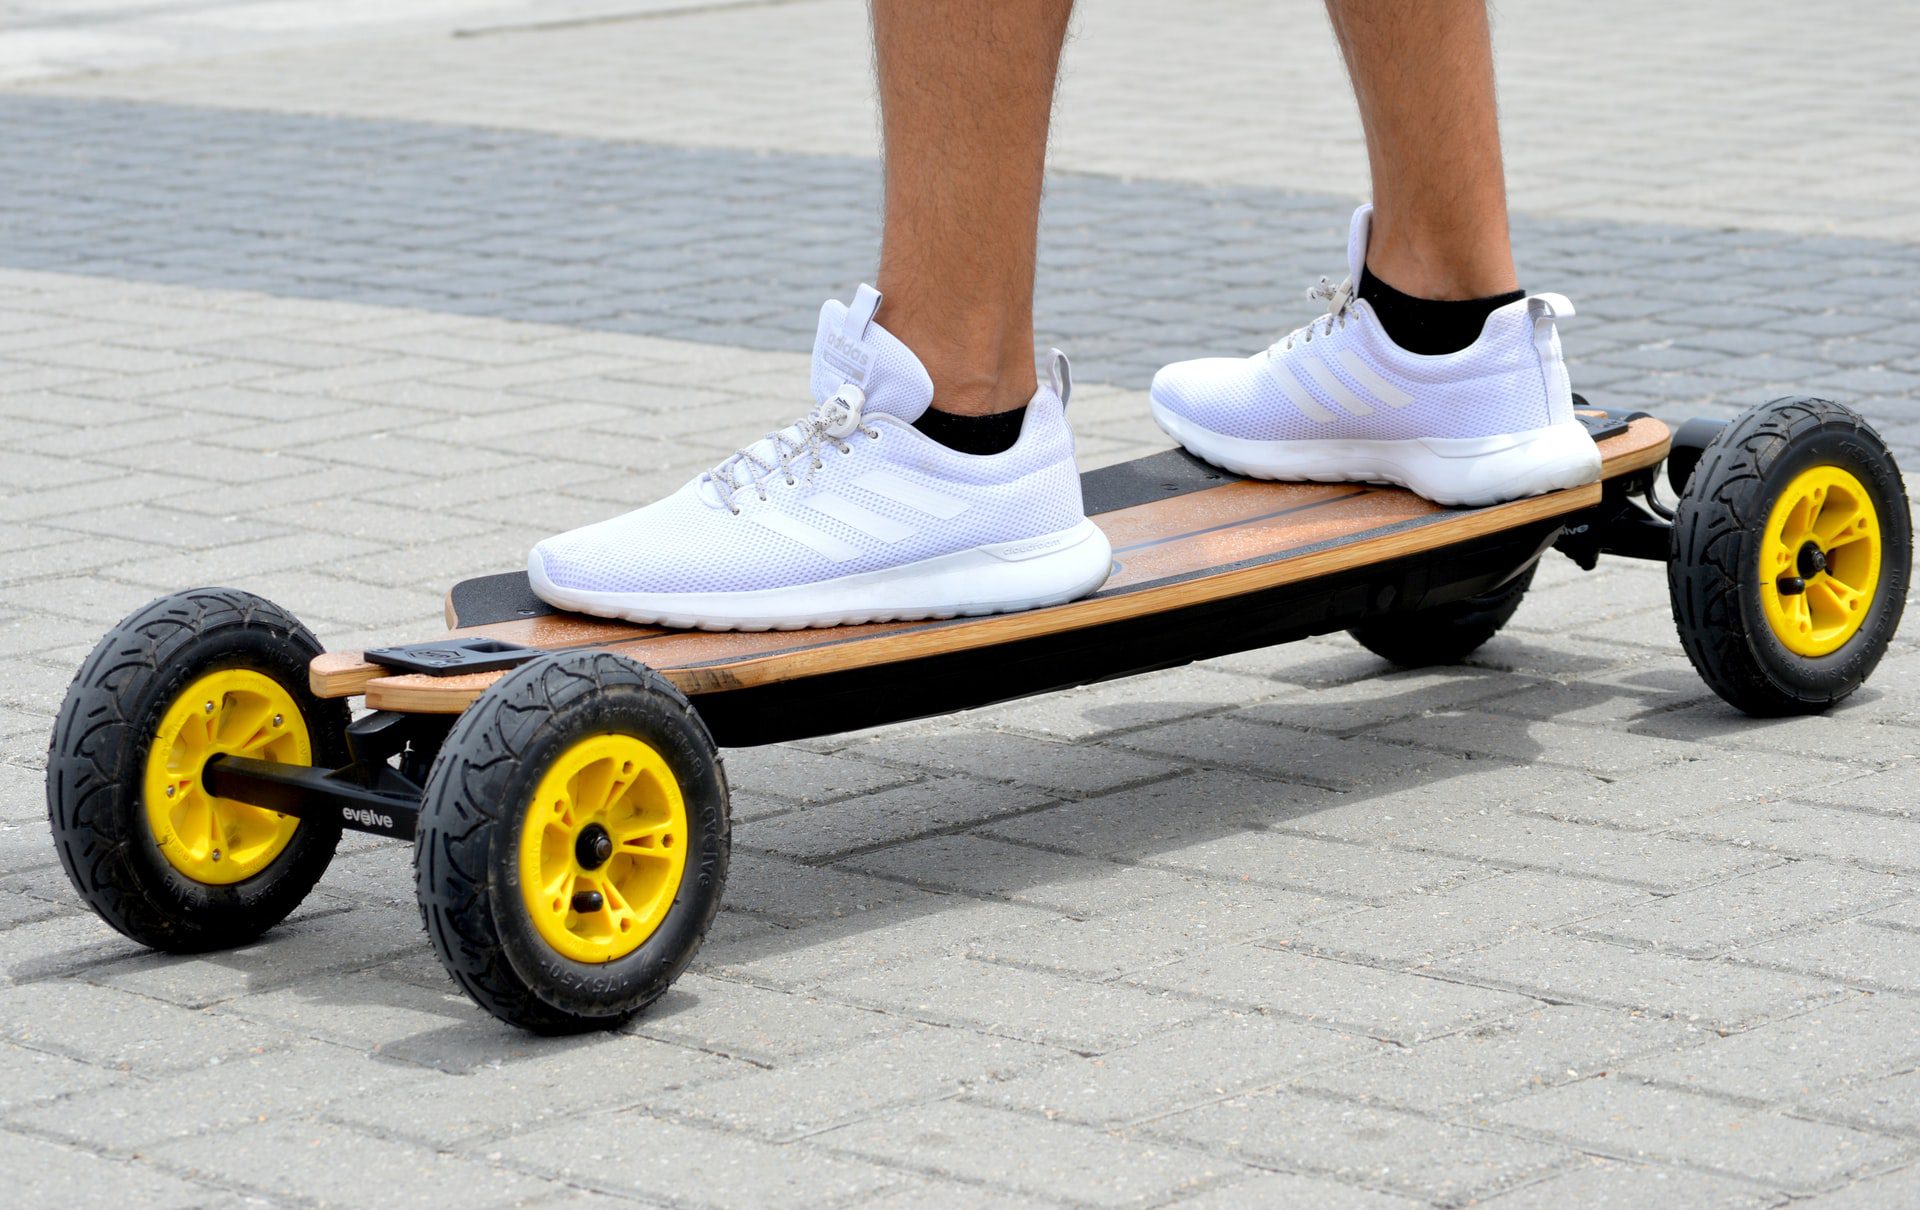 move operator Play computer games Best Electric Skateboards For Commuting [ Reviews & Buying Guide ] ⋆ Skate  Newswire